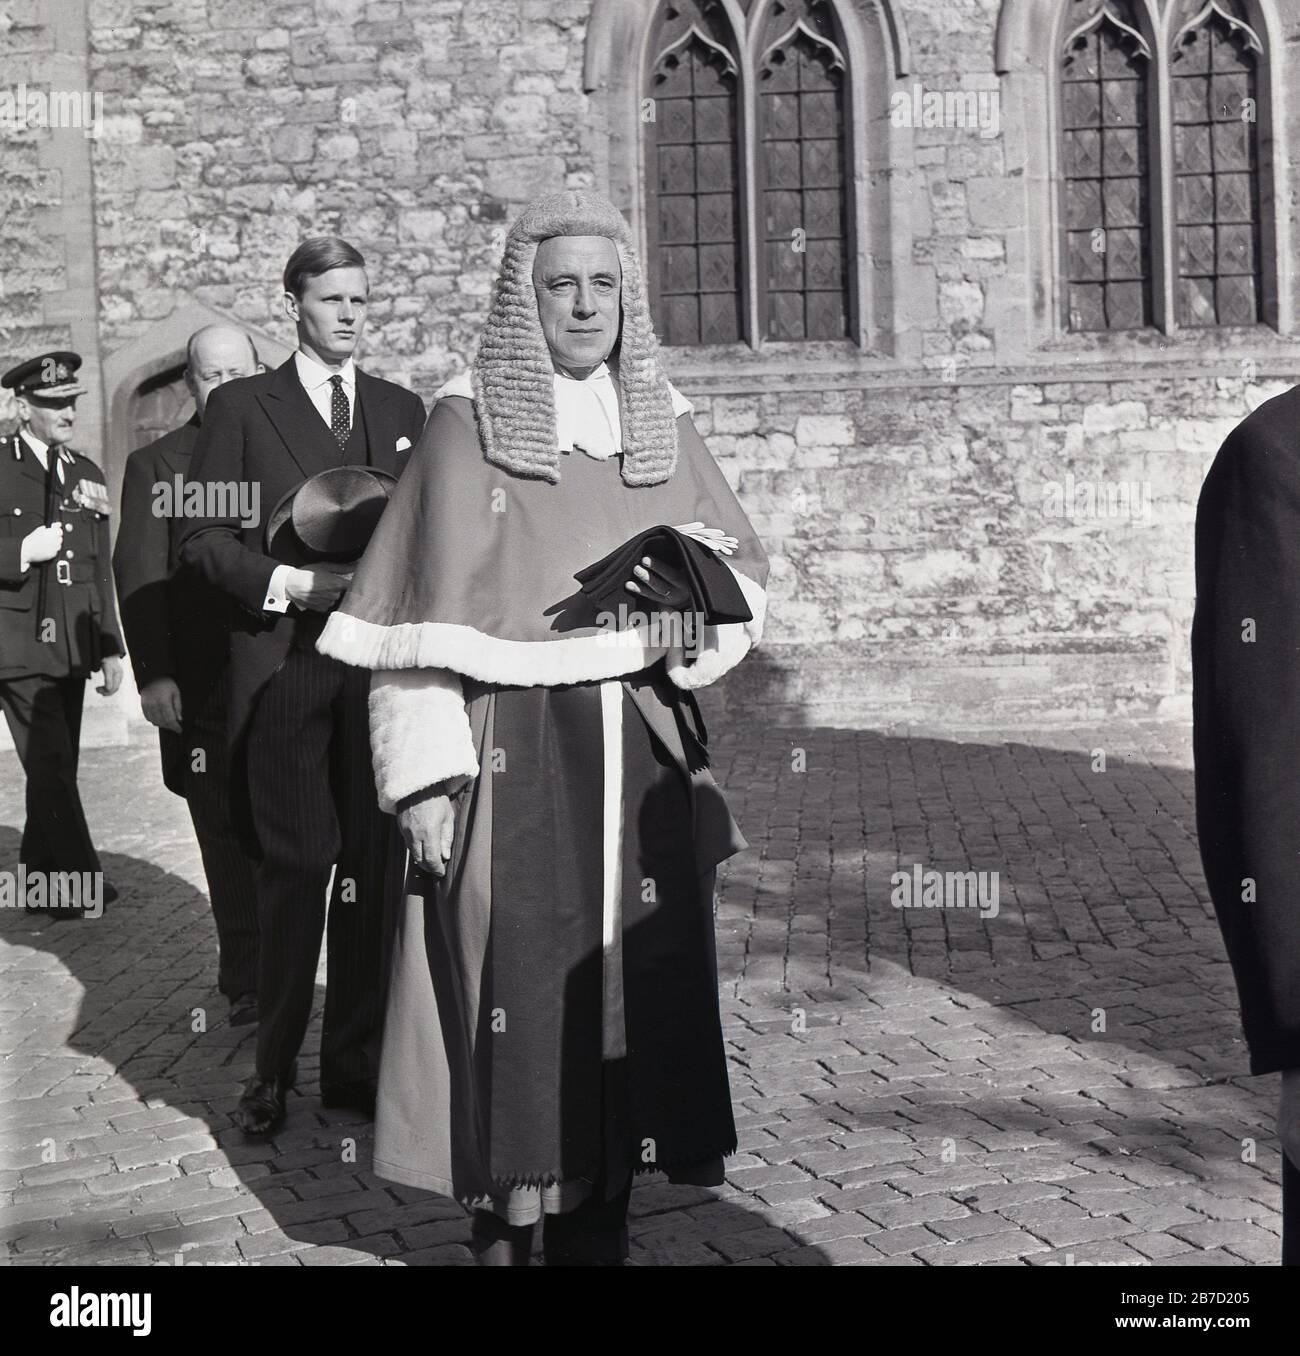 1960s, historical, a male high court judge walking in grounds of church, wearing gown and traditional court headdress, England, UK. Stock Photo